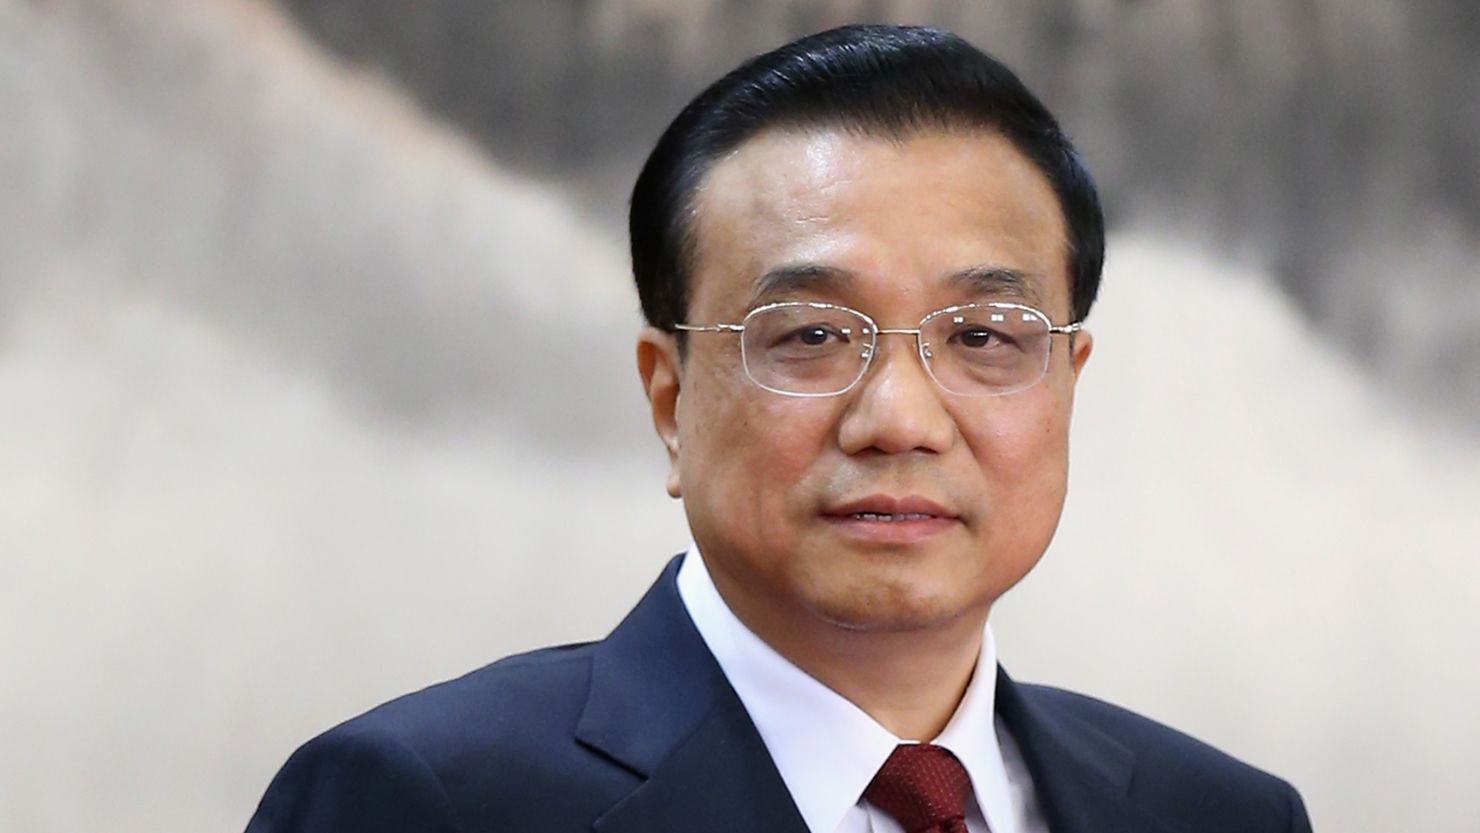 Chinese Premier Li Keqiang has weighed in on an EU investigation into the alleged dumping of Chinese solar panels.